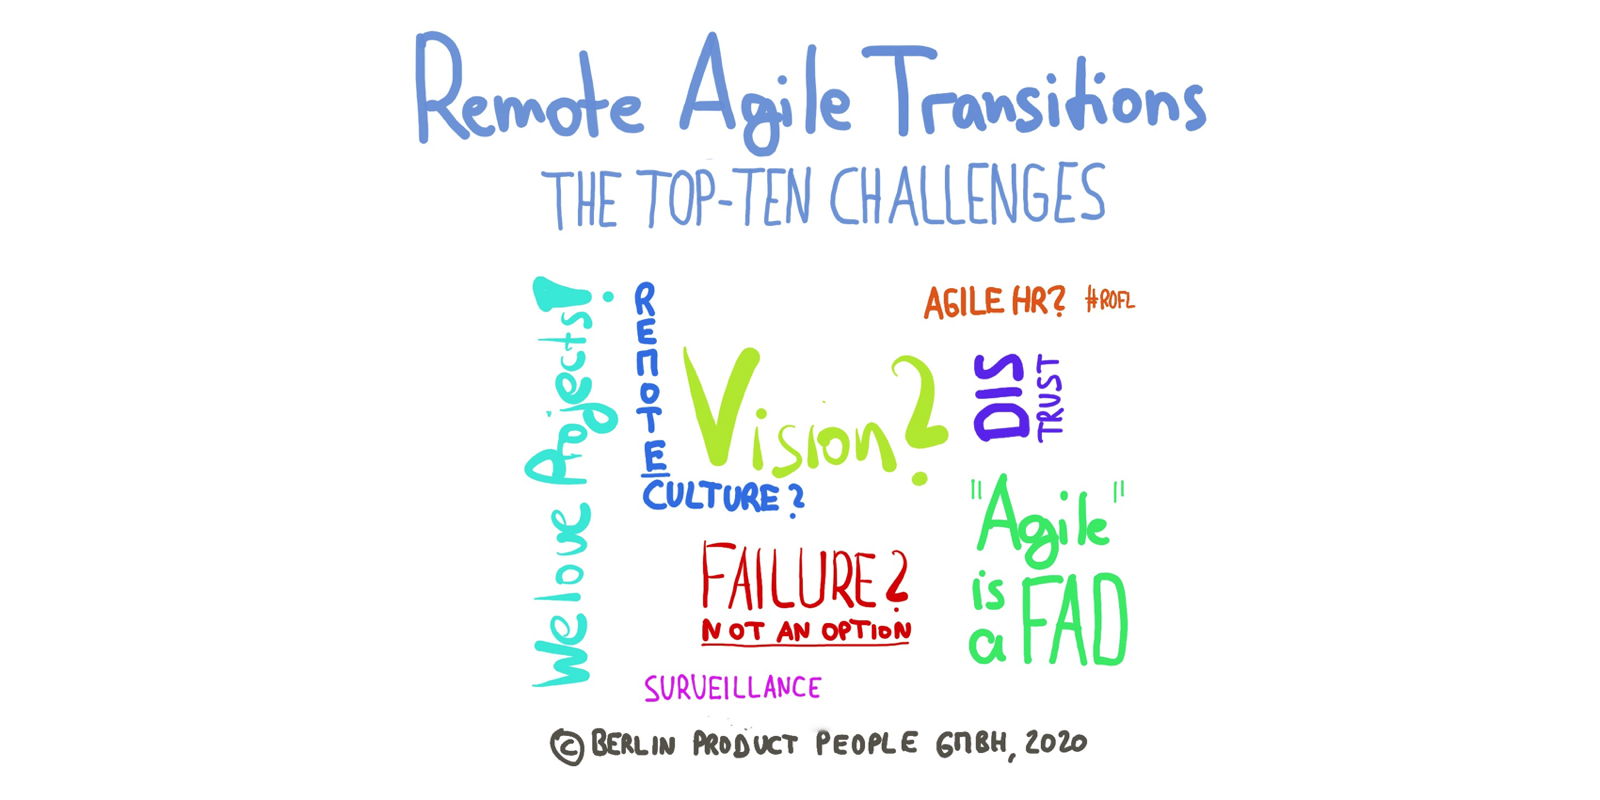 Remote Agile Transitions — The Top-Ten Challenges — Berlin Product People GmbH